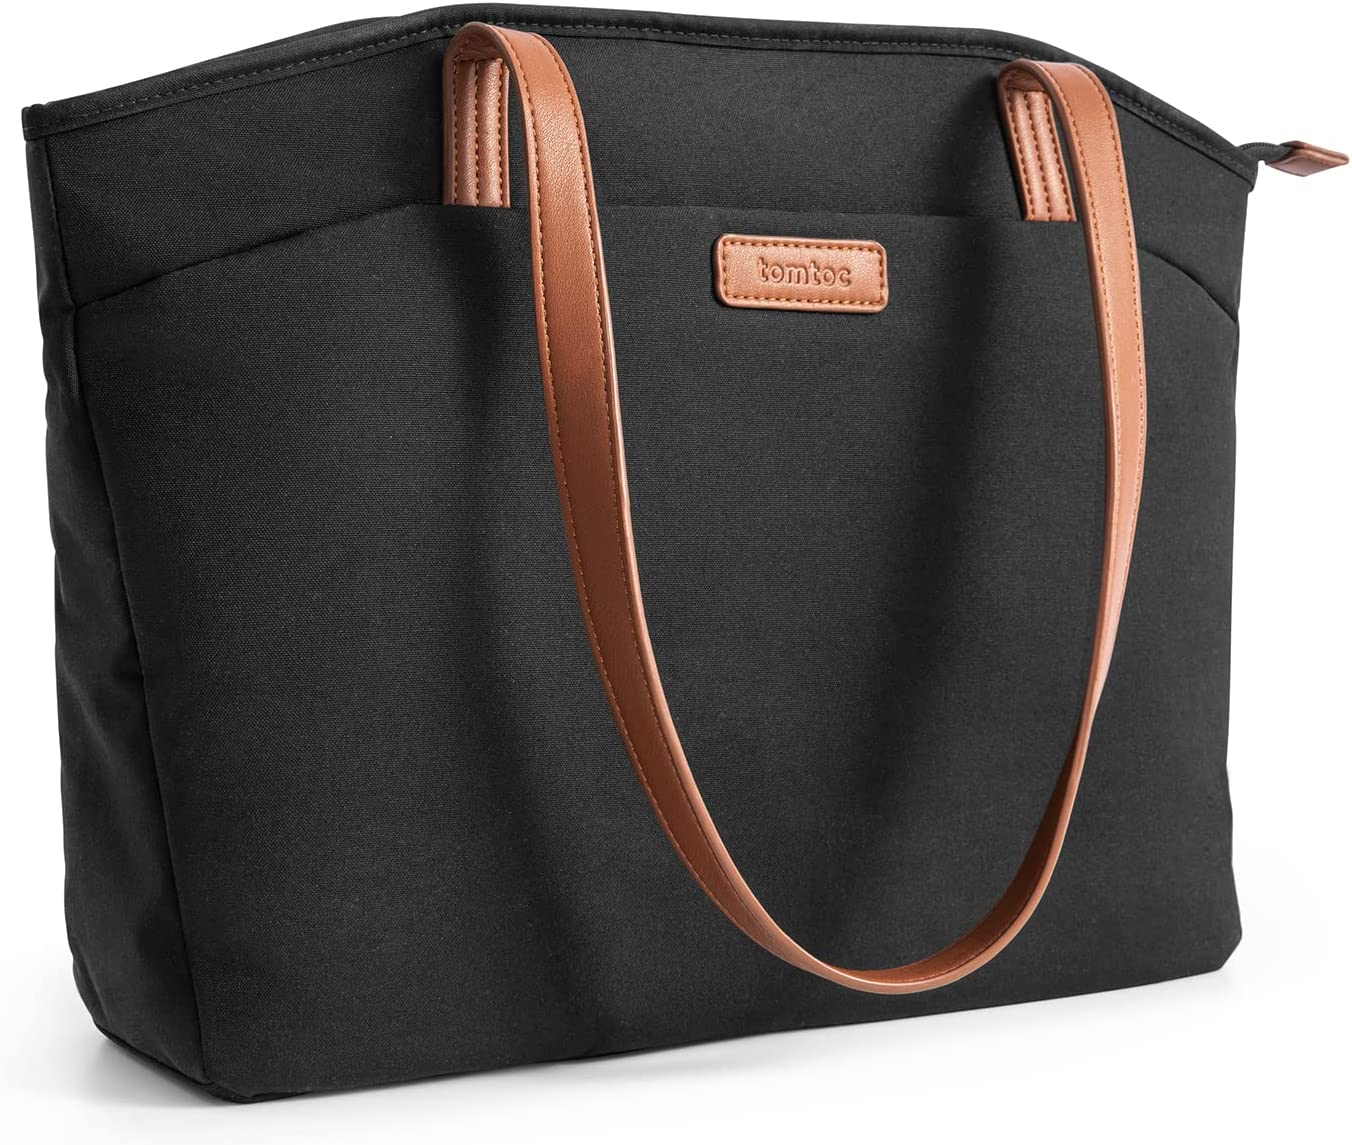 Tomtoc TheHer-A53 Laptop Tote Bag 16 inch - Black